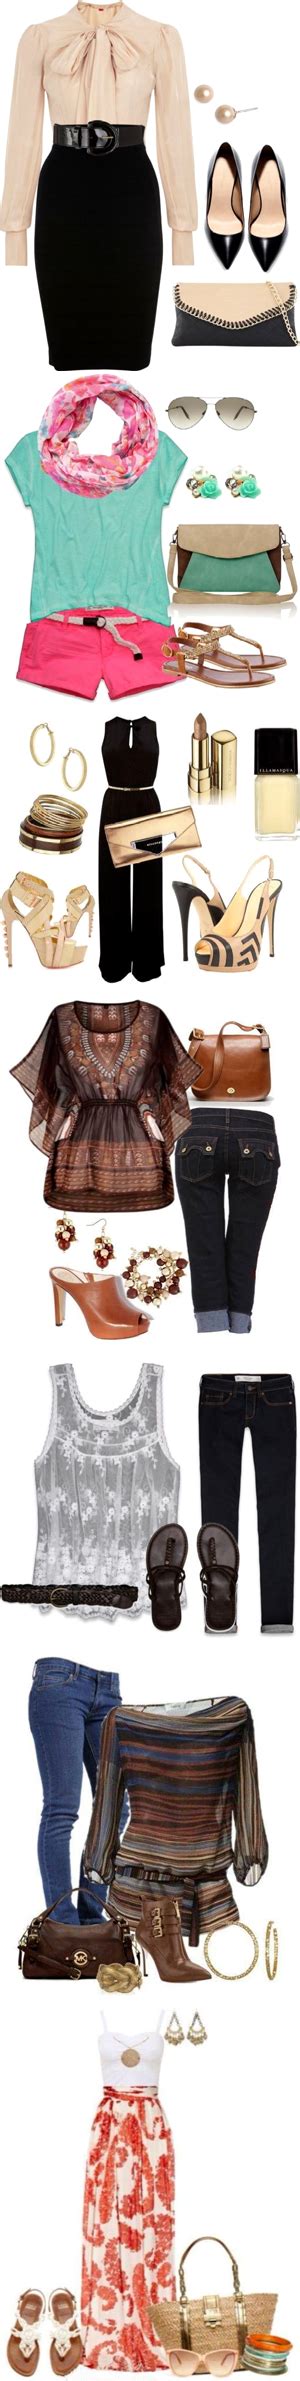 Perfect Styles Style Fashion Polyvore Image